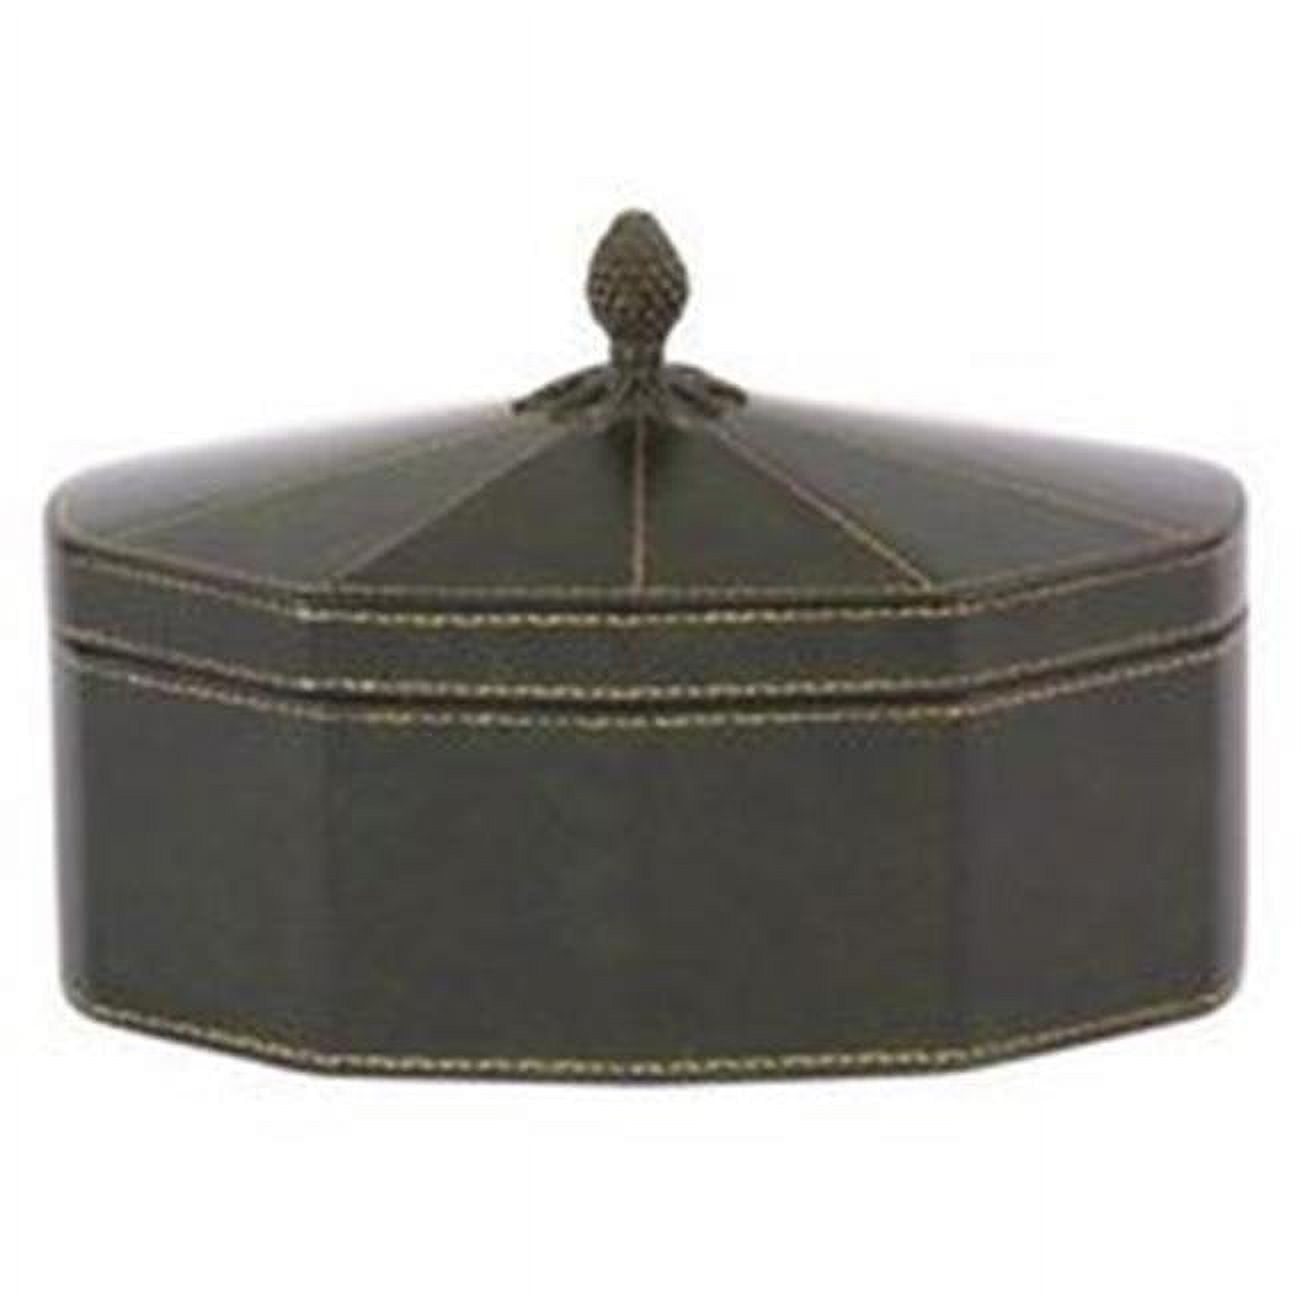 Distinctive Designs Db-263b Green Leather Decagon Box With Lid & Pineapple Finial